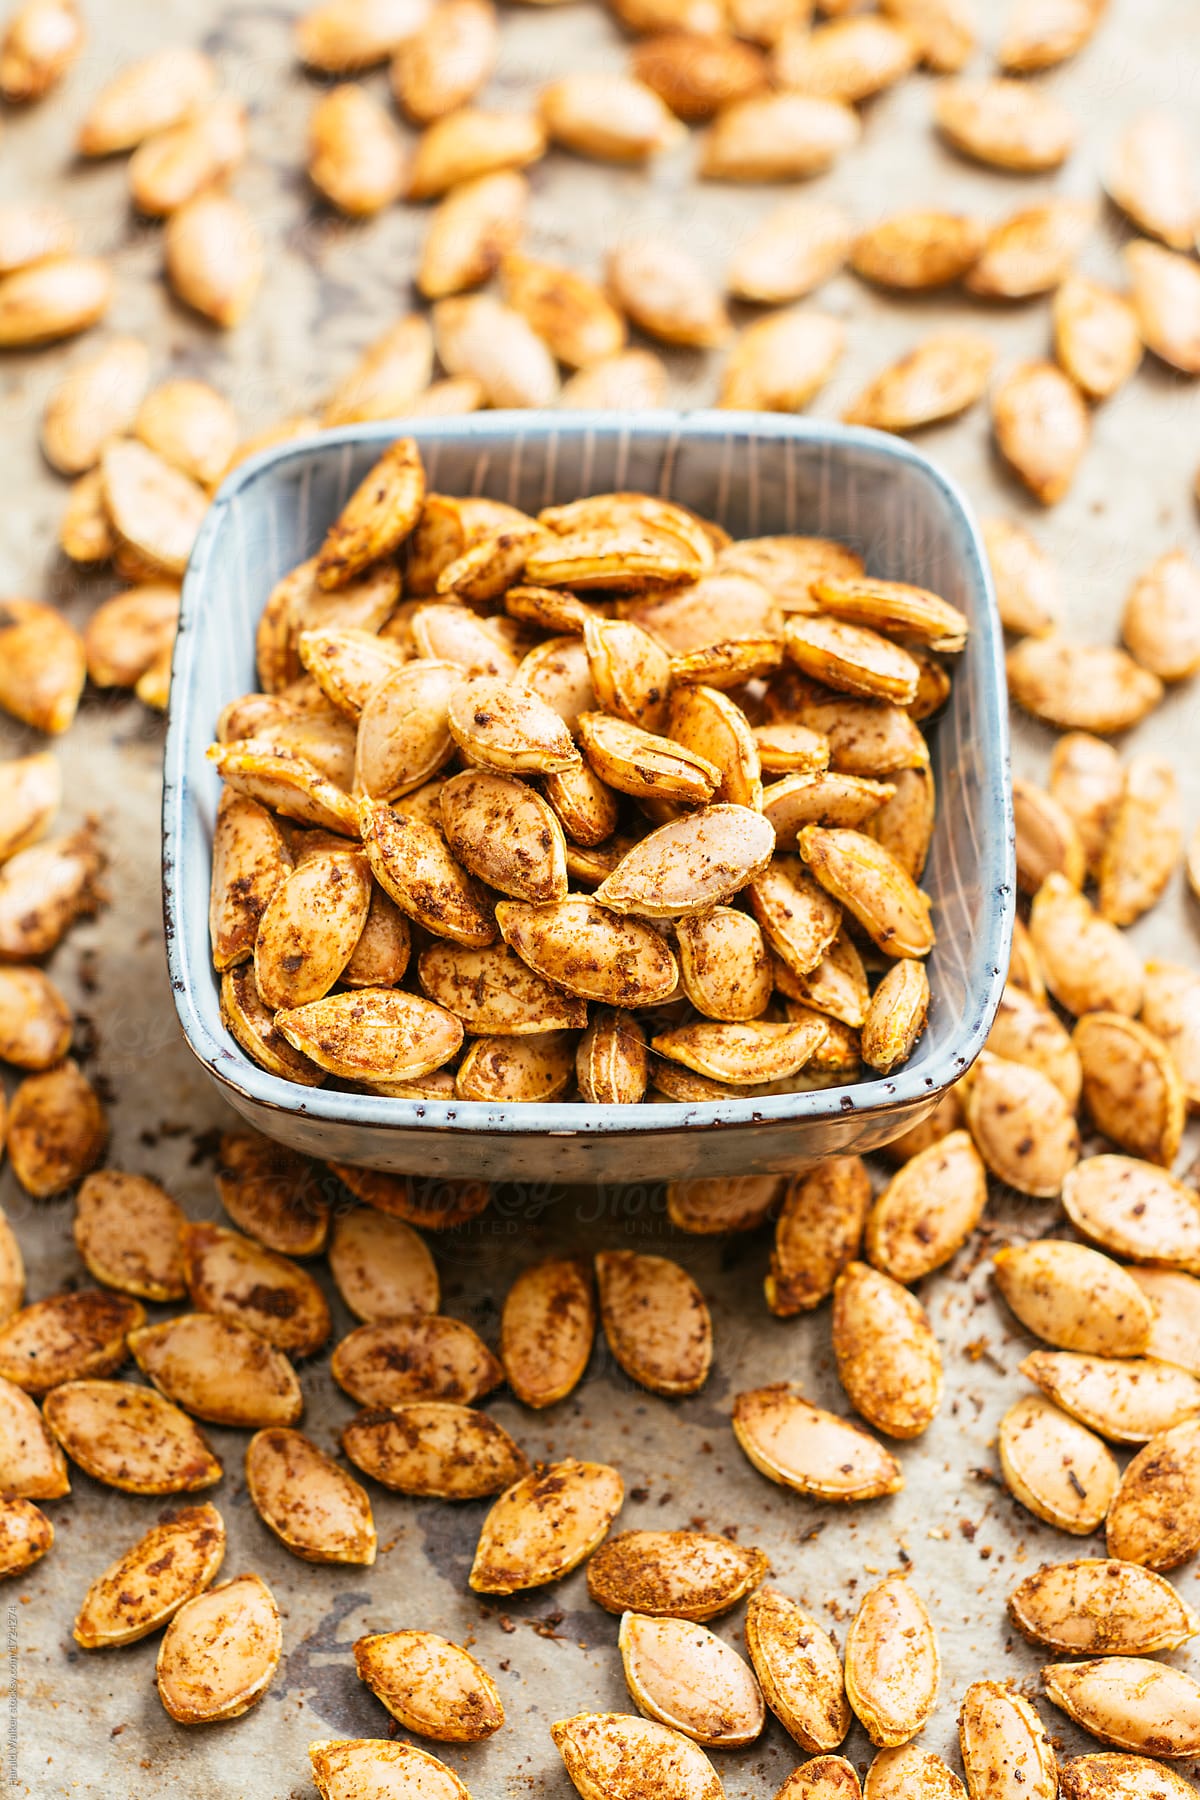 Spicy roasted squash seeds